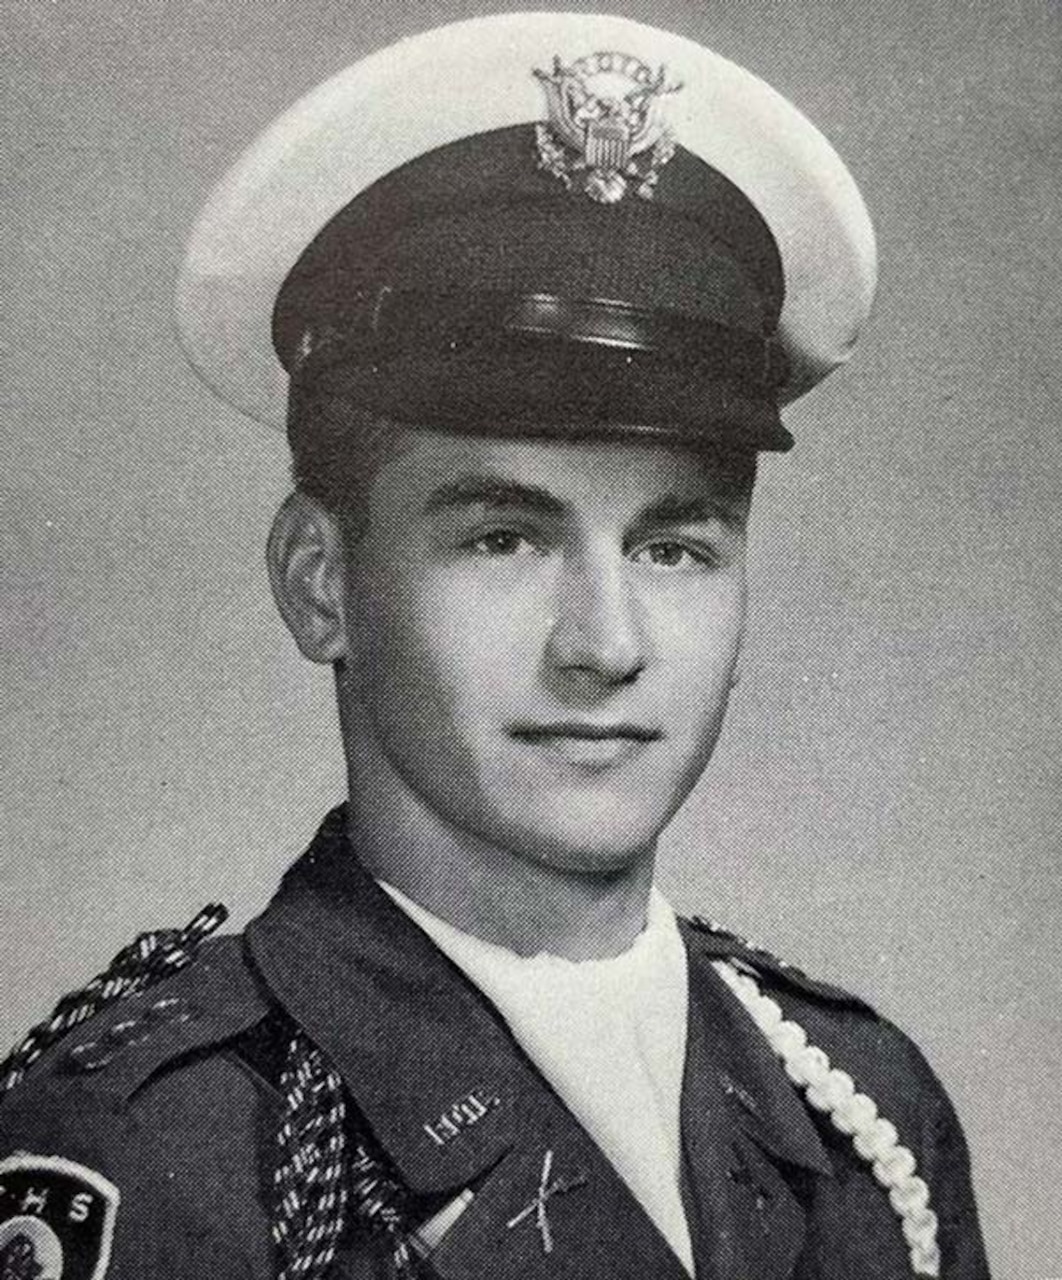 A man in military uniform poses for a photo